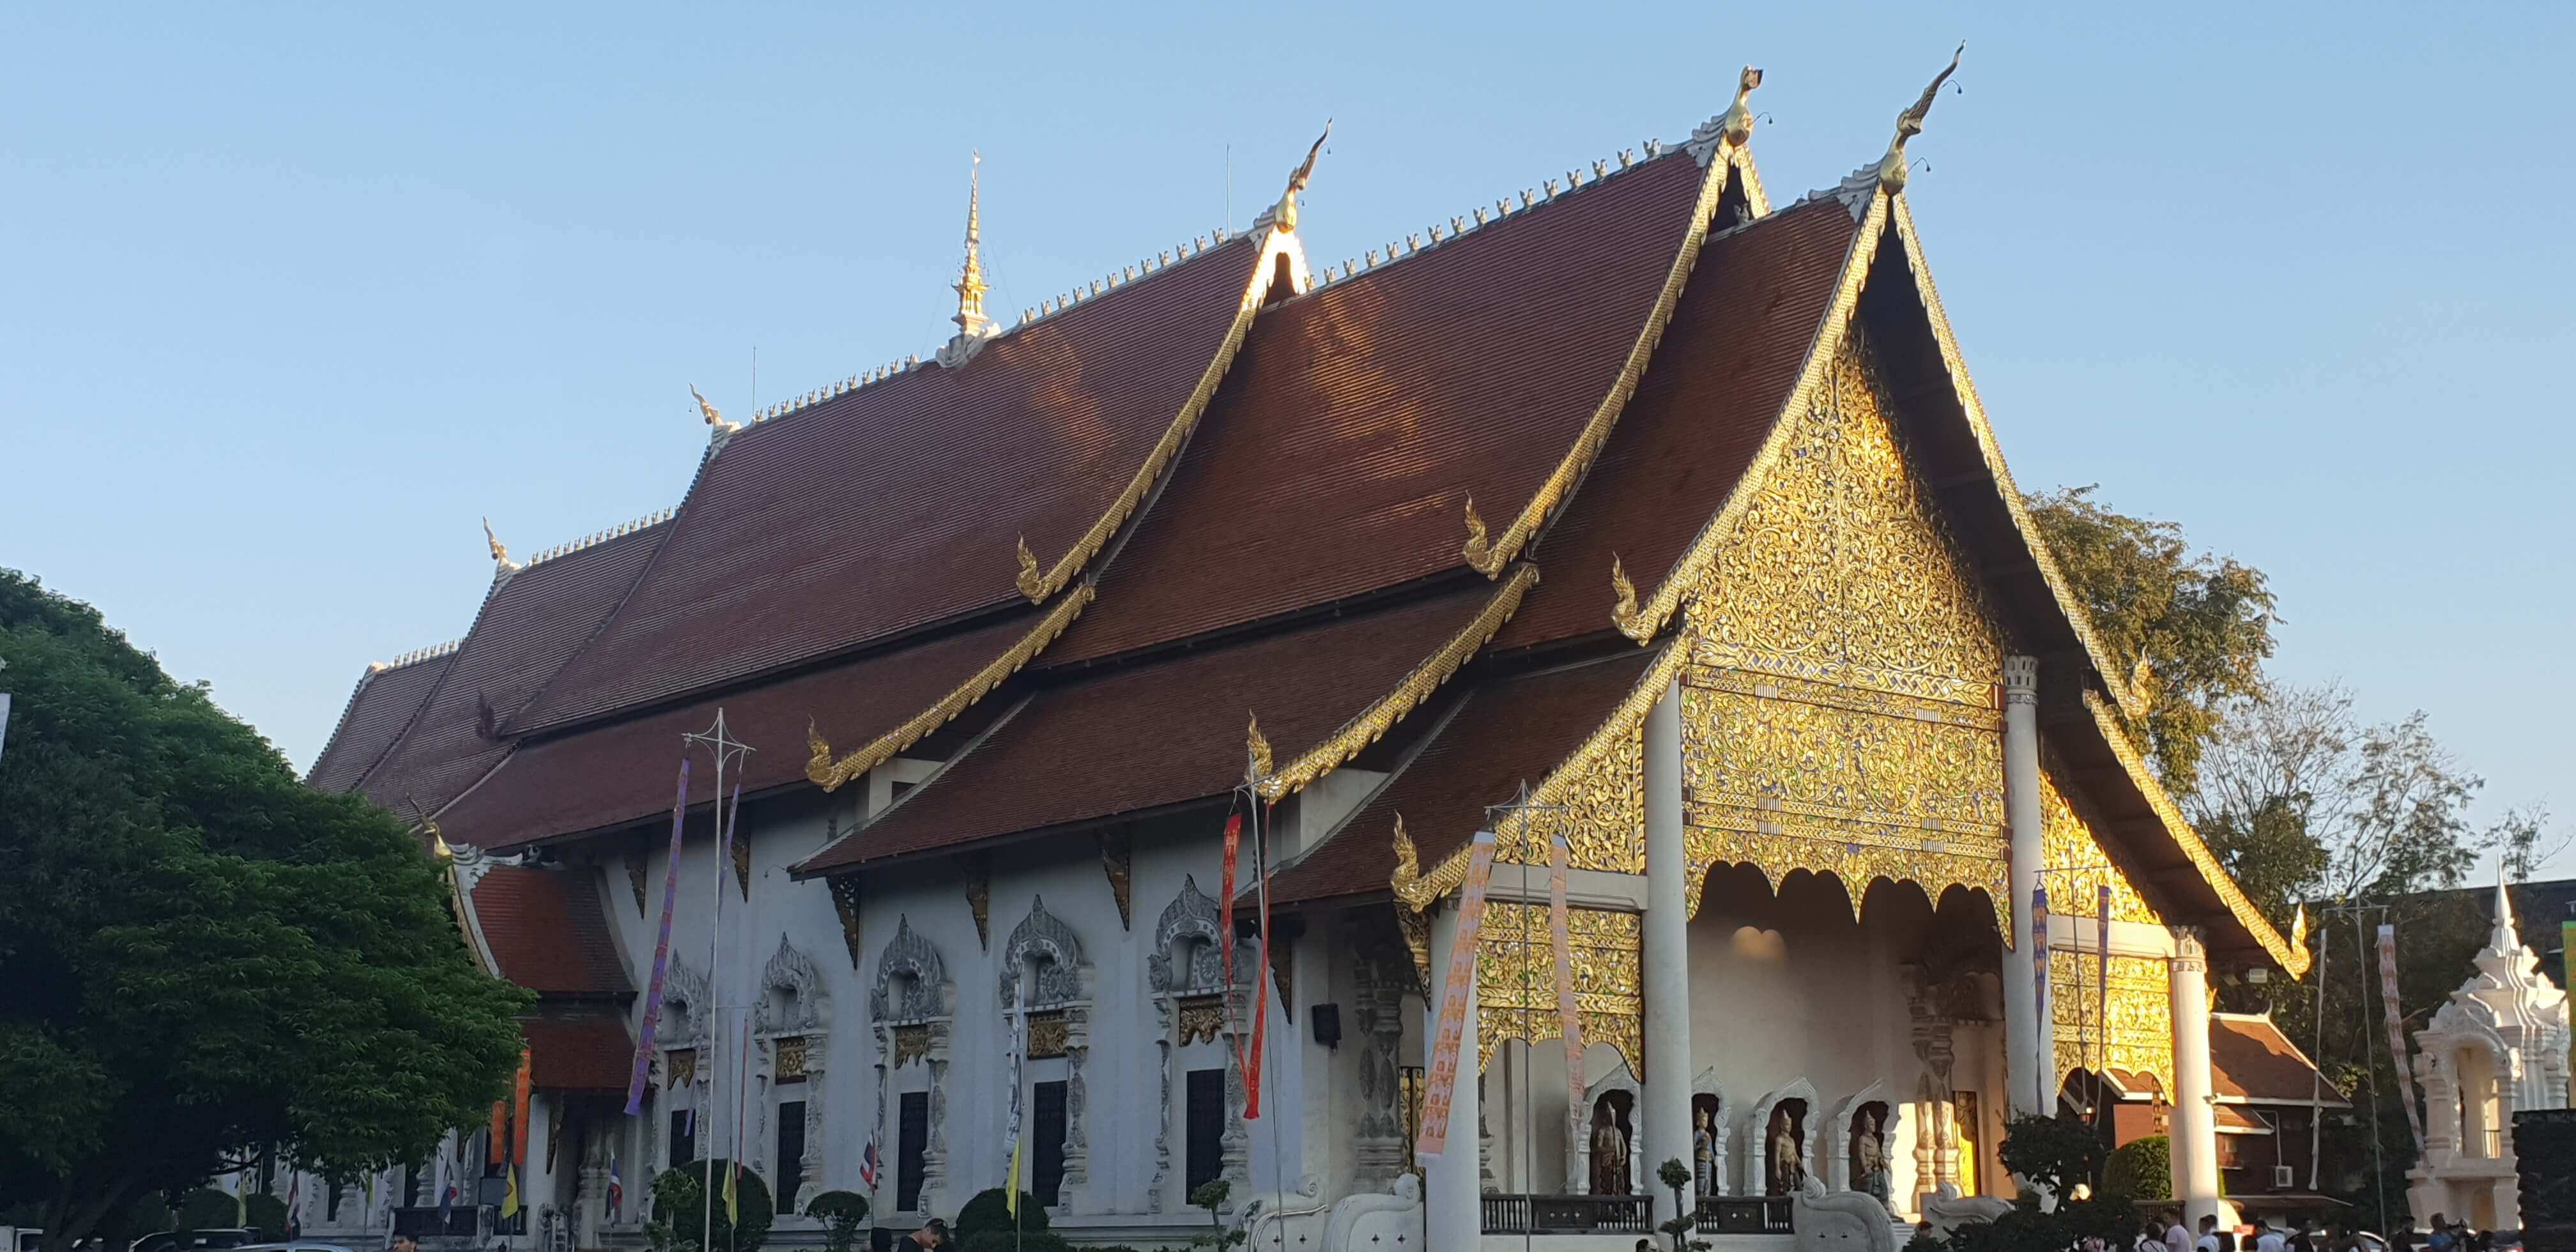 Wat Chedi Luang is one of the most venerated temples in Chiang Mai